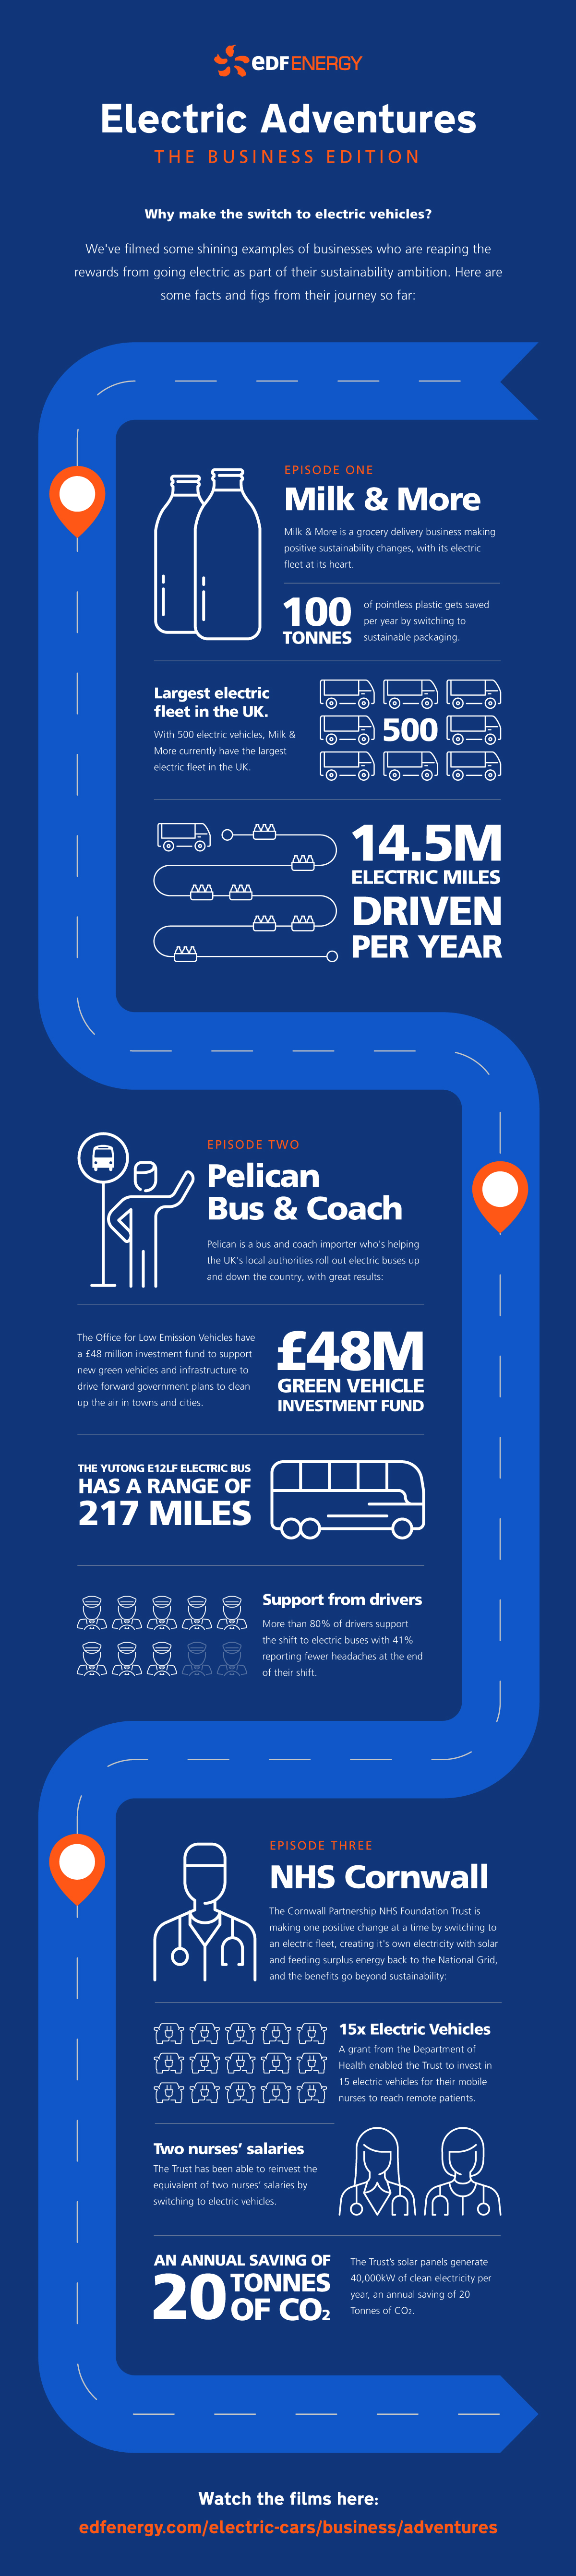 An infographic showing the journey businesses can take to electrifying their fleet of vehicles.